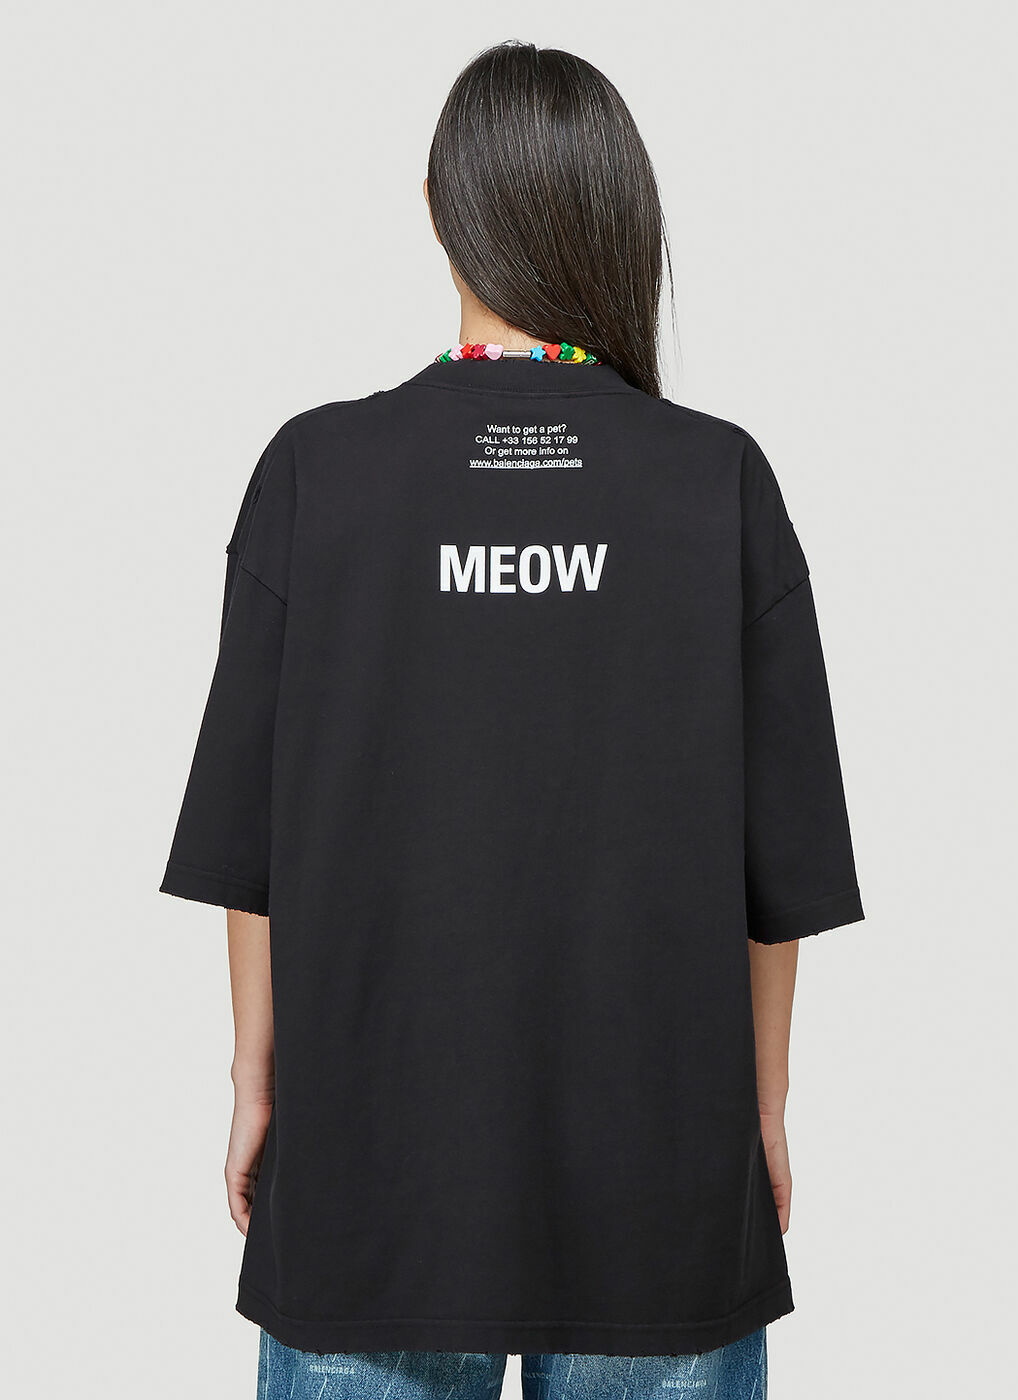 FIND BALENCIAGA I LOVE CATS SHIRT WITH TAGS   rQualityReps